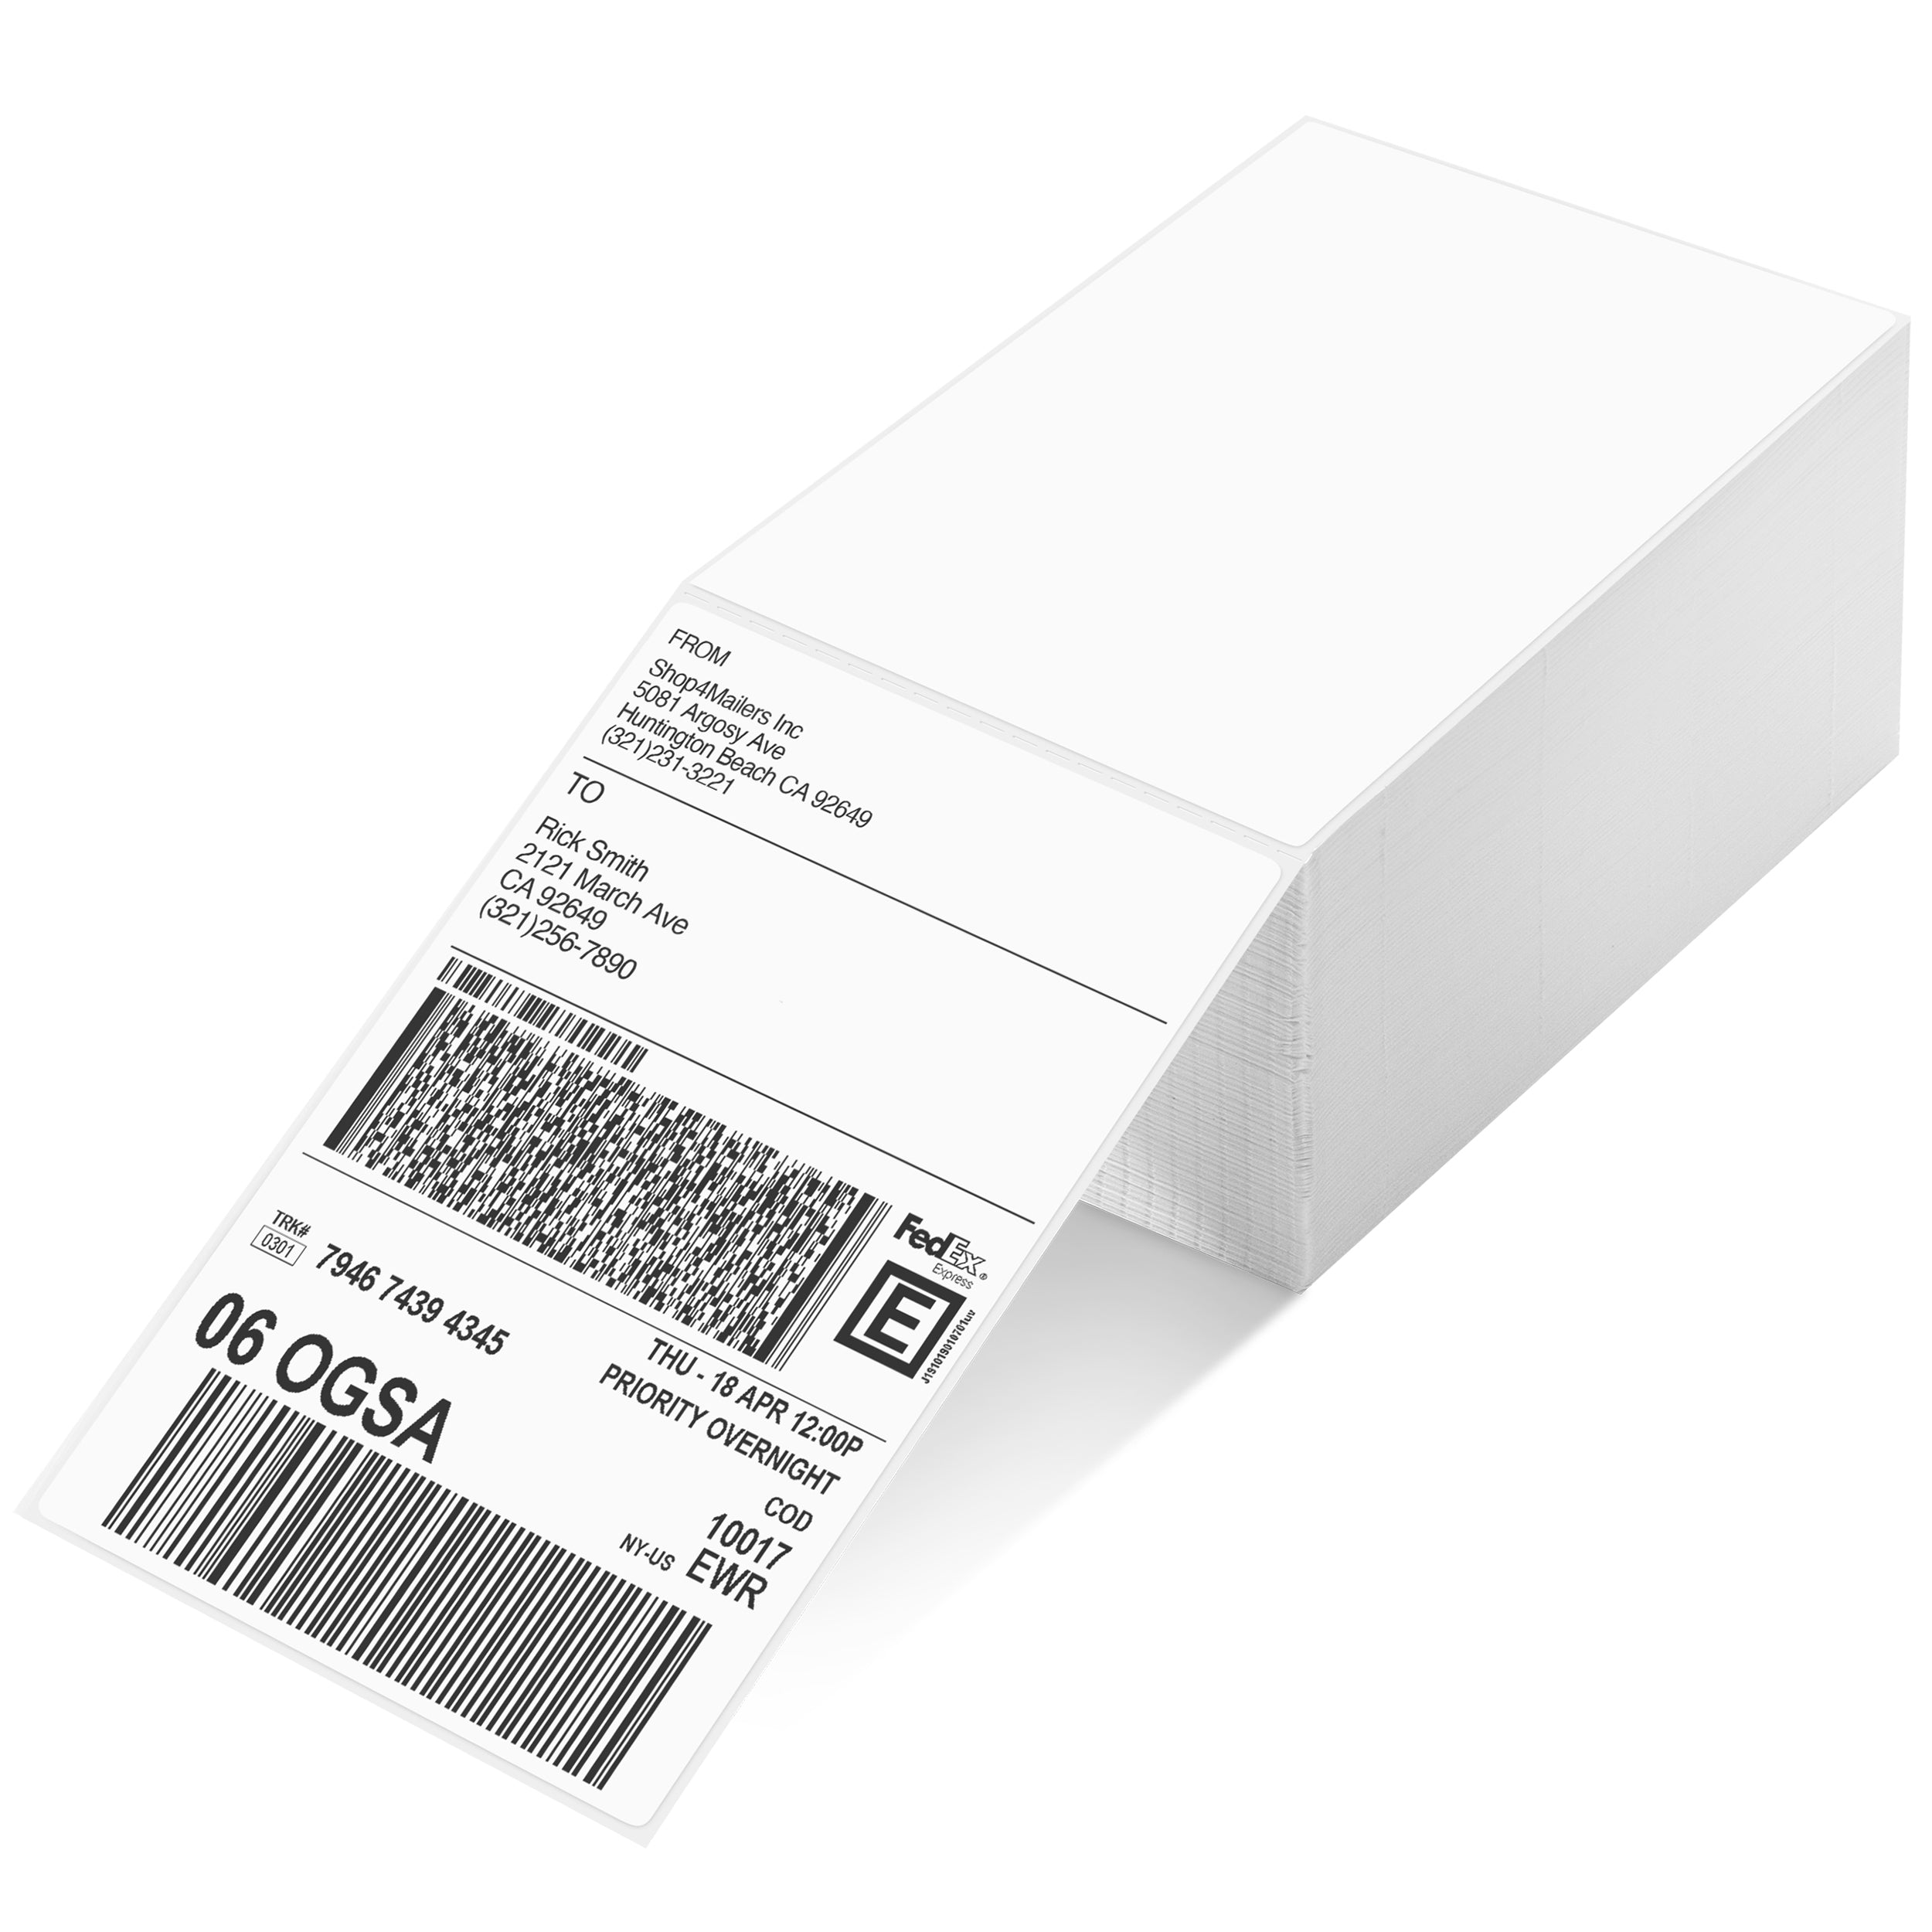 4 x 6 Thermal Transfer Paper Labels, Perforated, Opaque (Cover